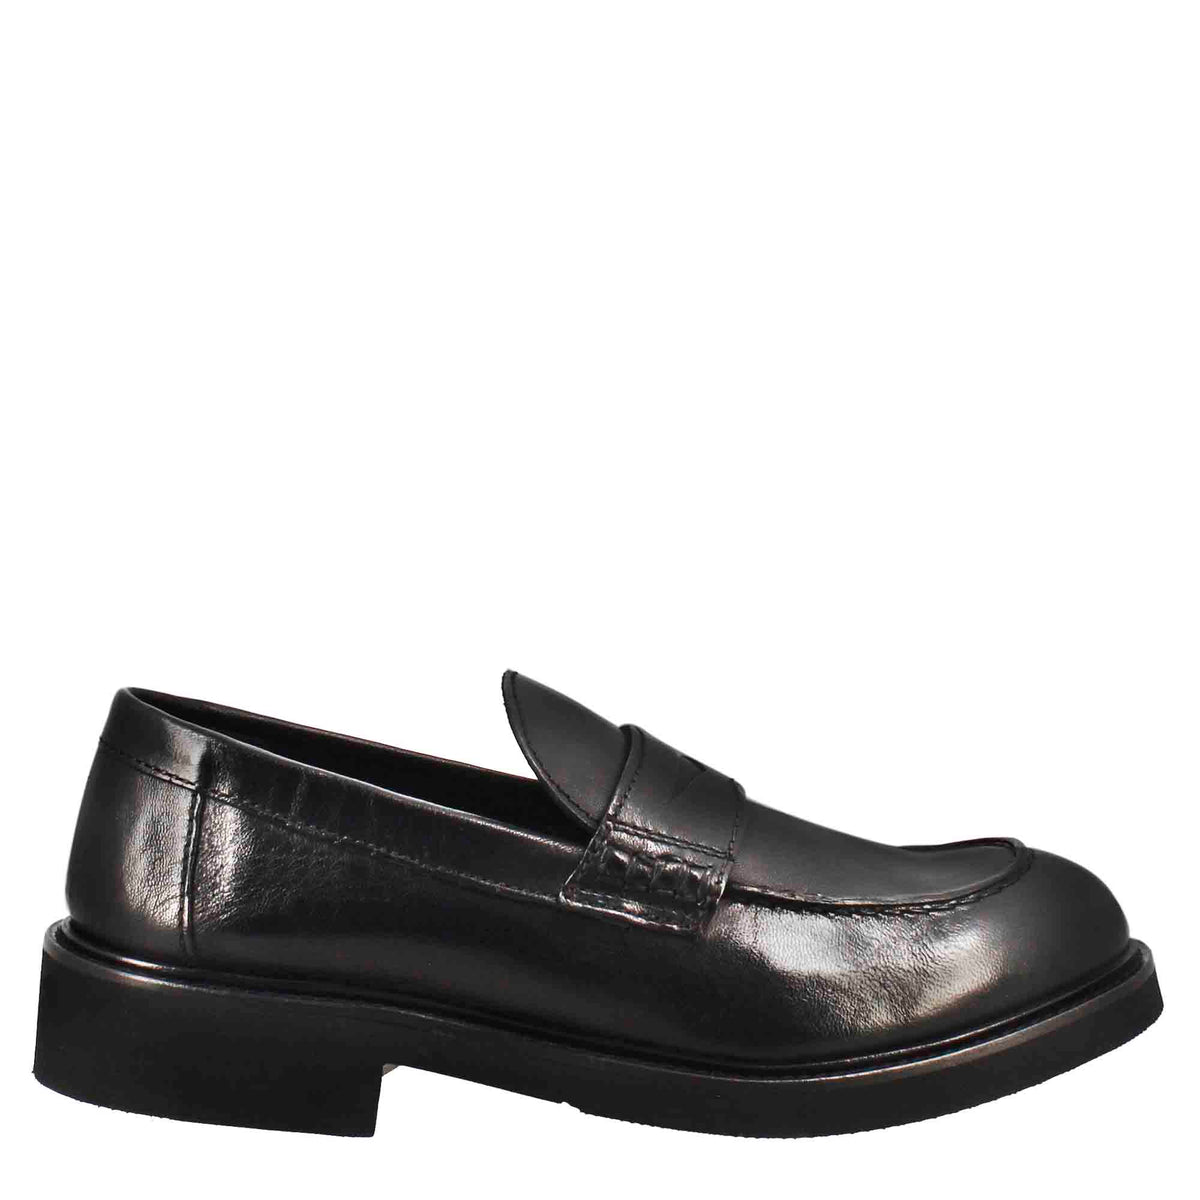 Paupa women's moccasin in black washed leather